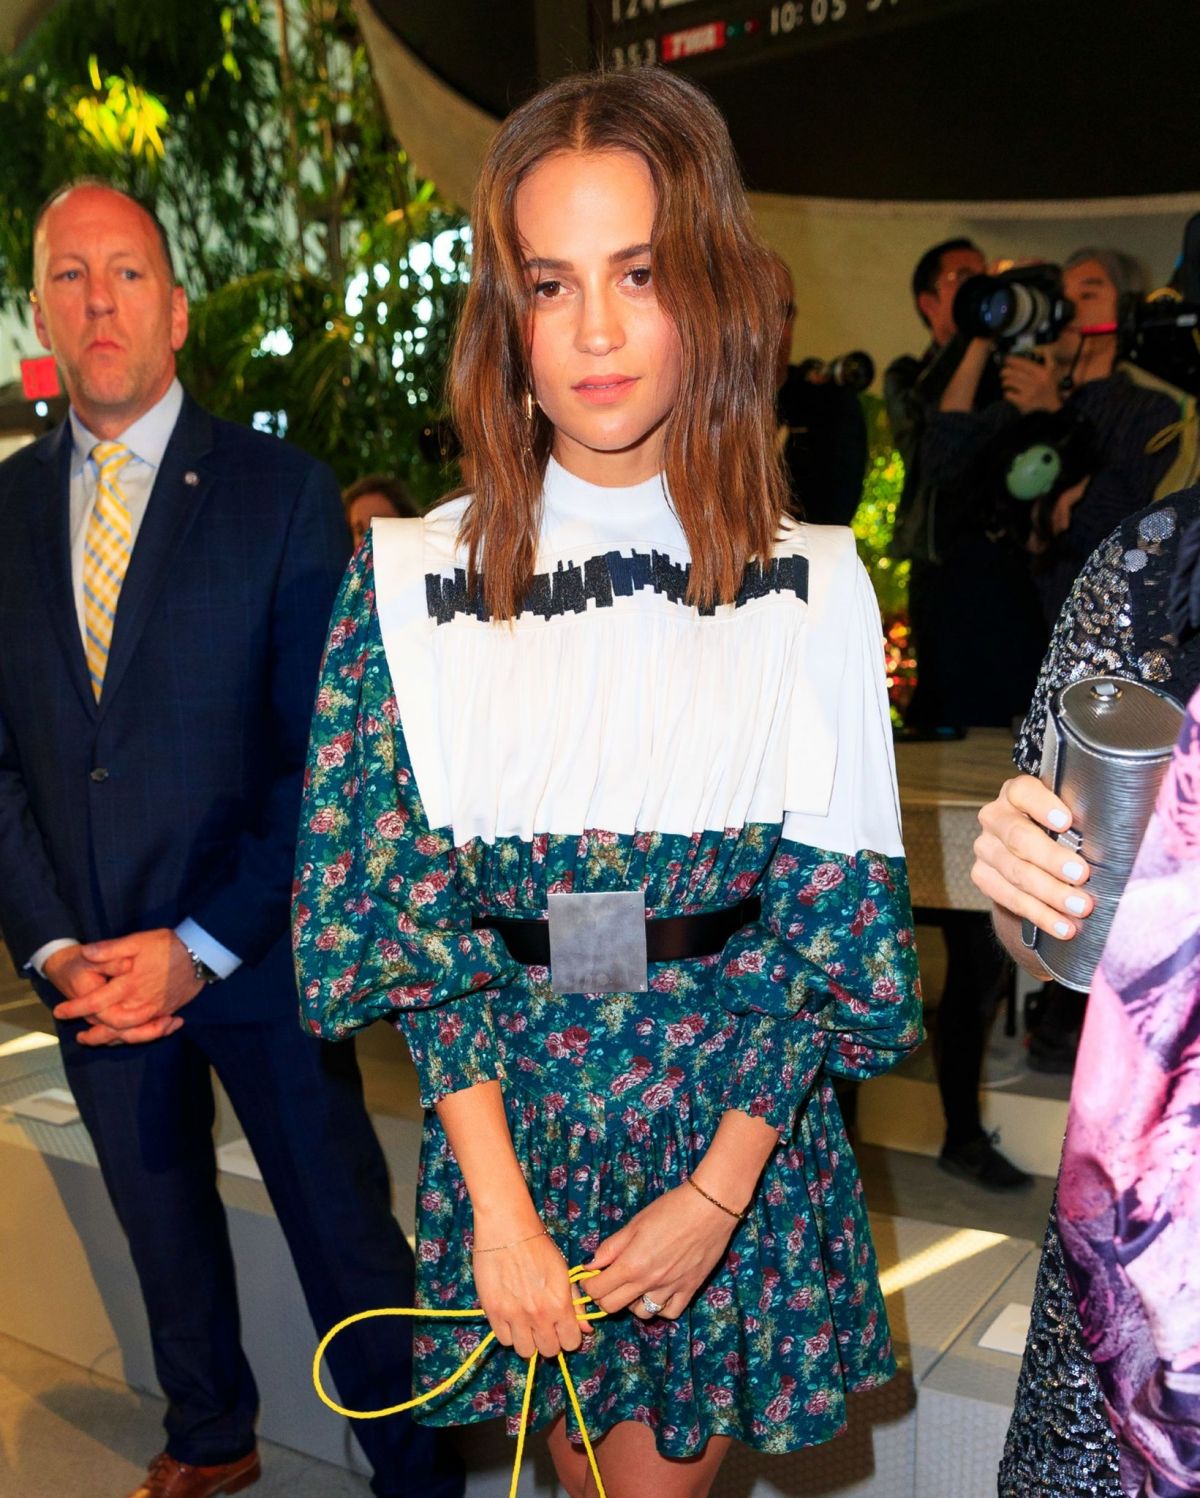 ALICIA VIKANDER at Louis Vuitton Cruise 2020 Fashion Show at JFK Airport in New Yokr 05/08/2019 ...